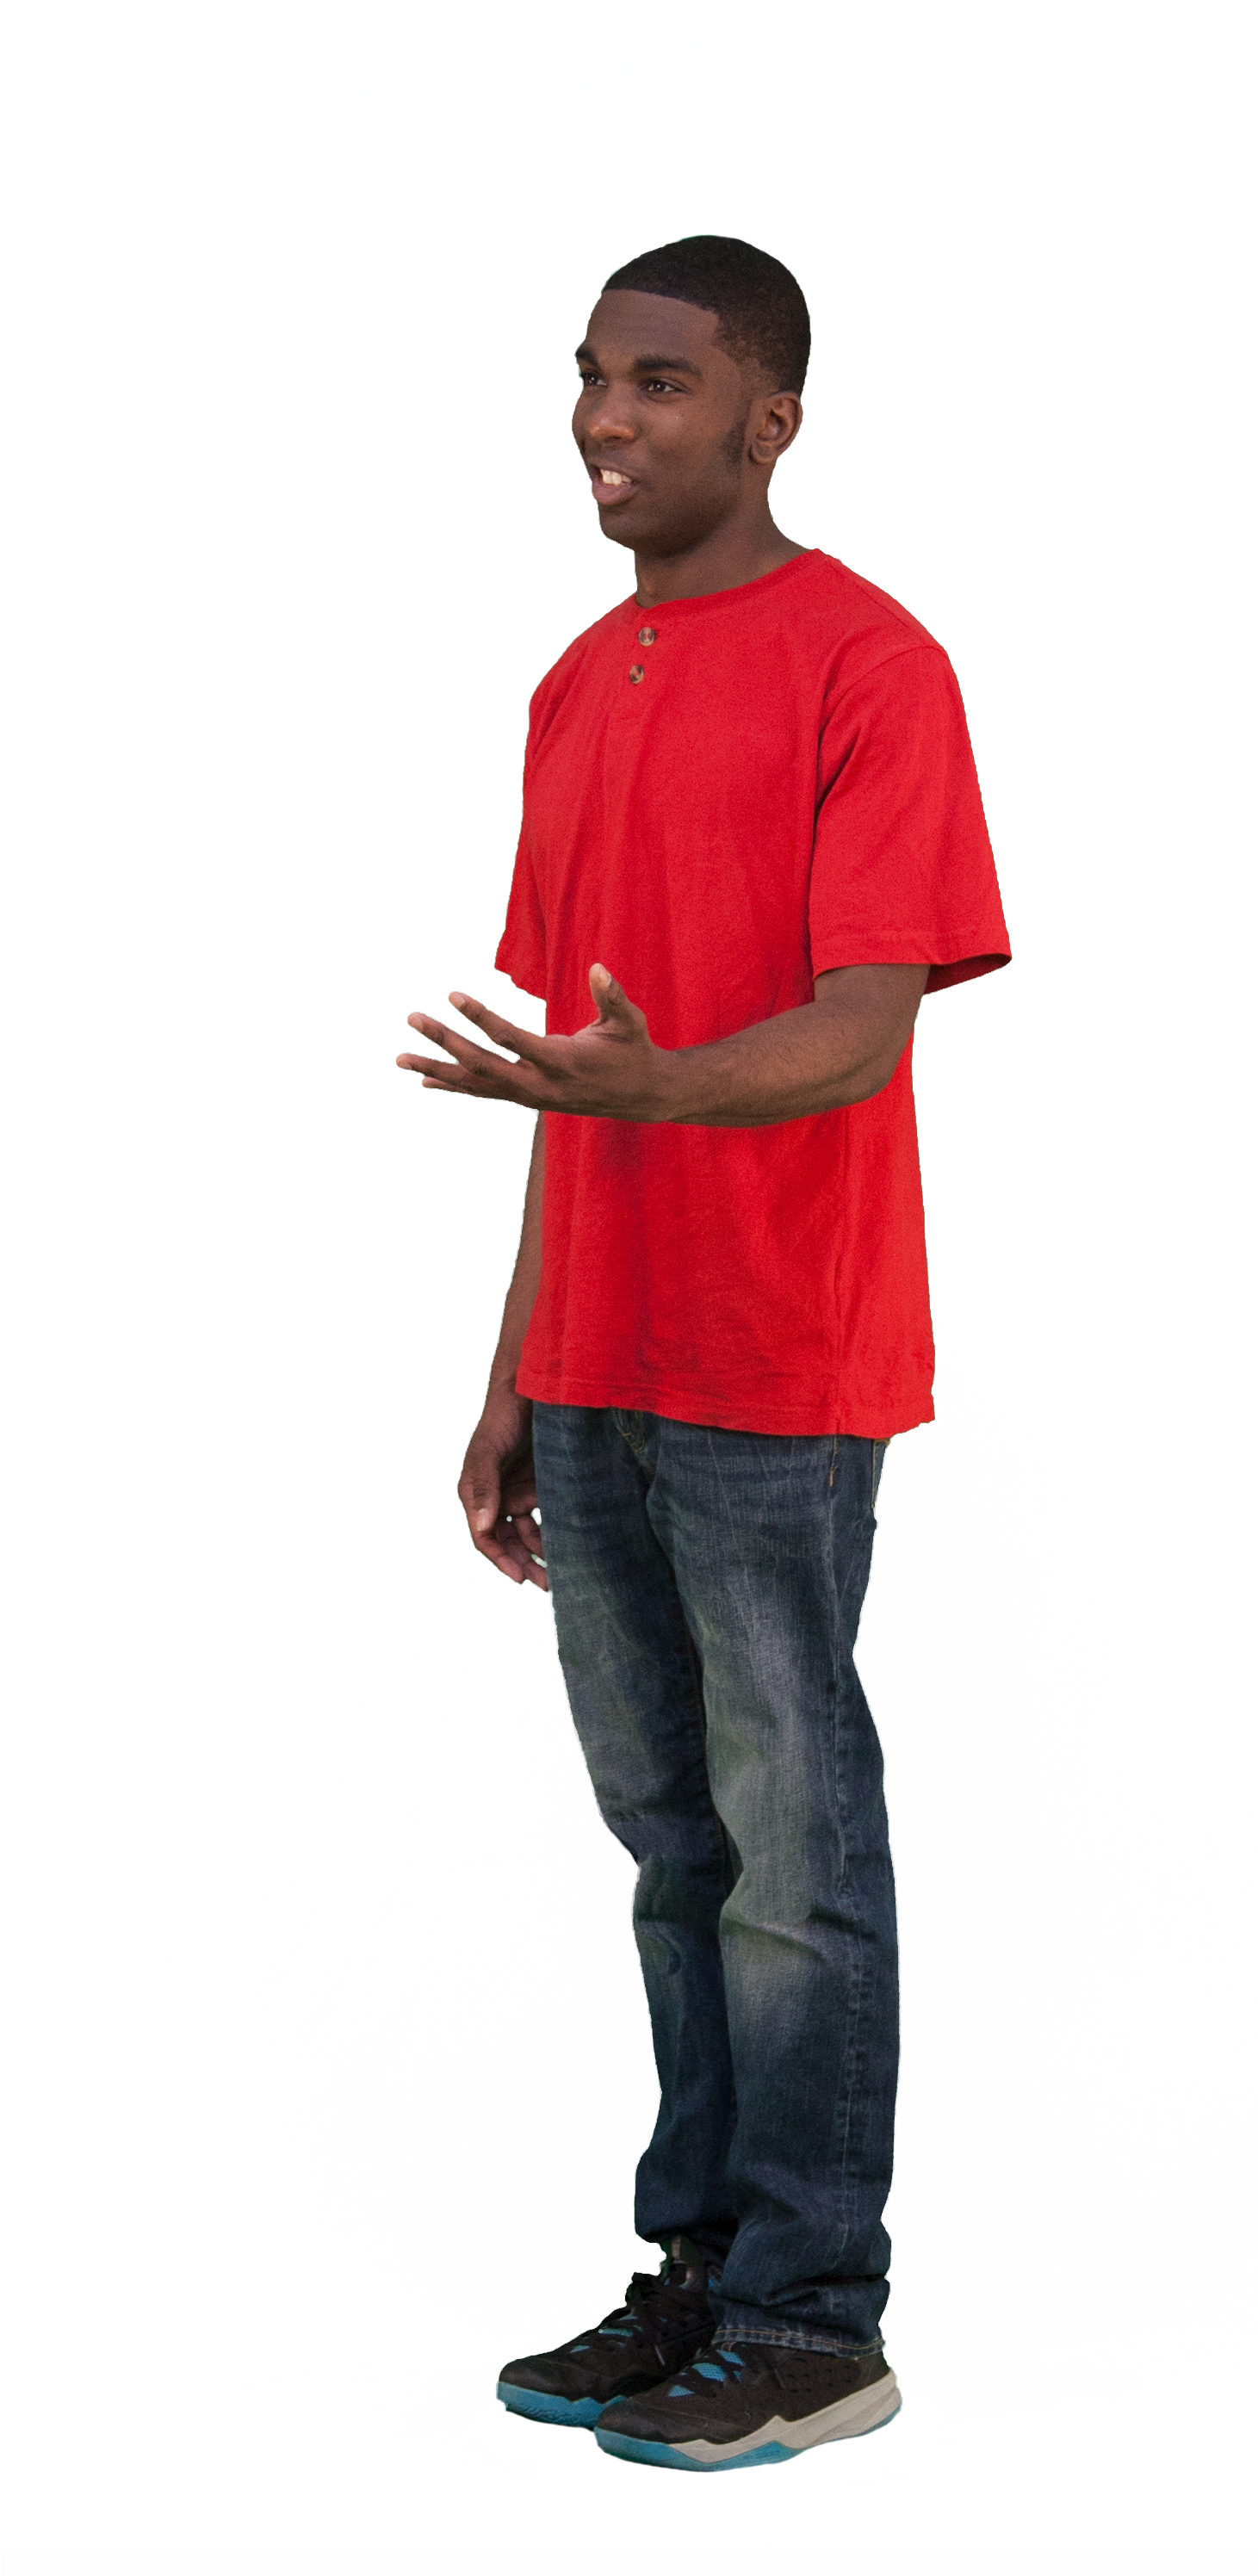 A Man In A Red Shirt